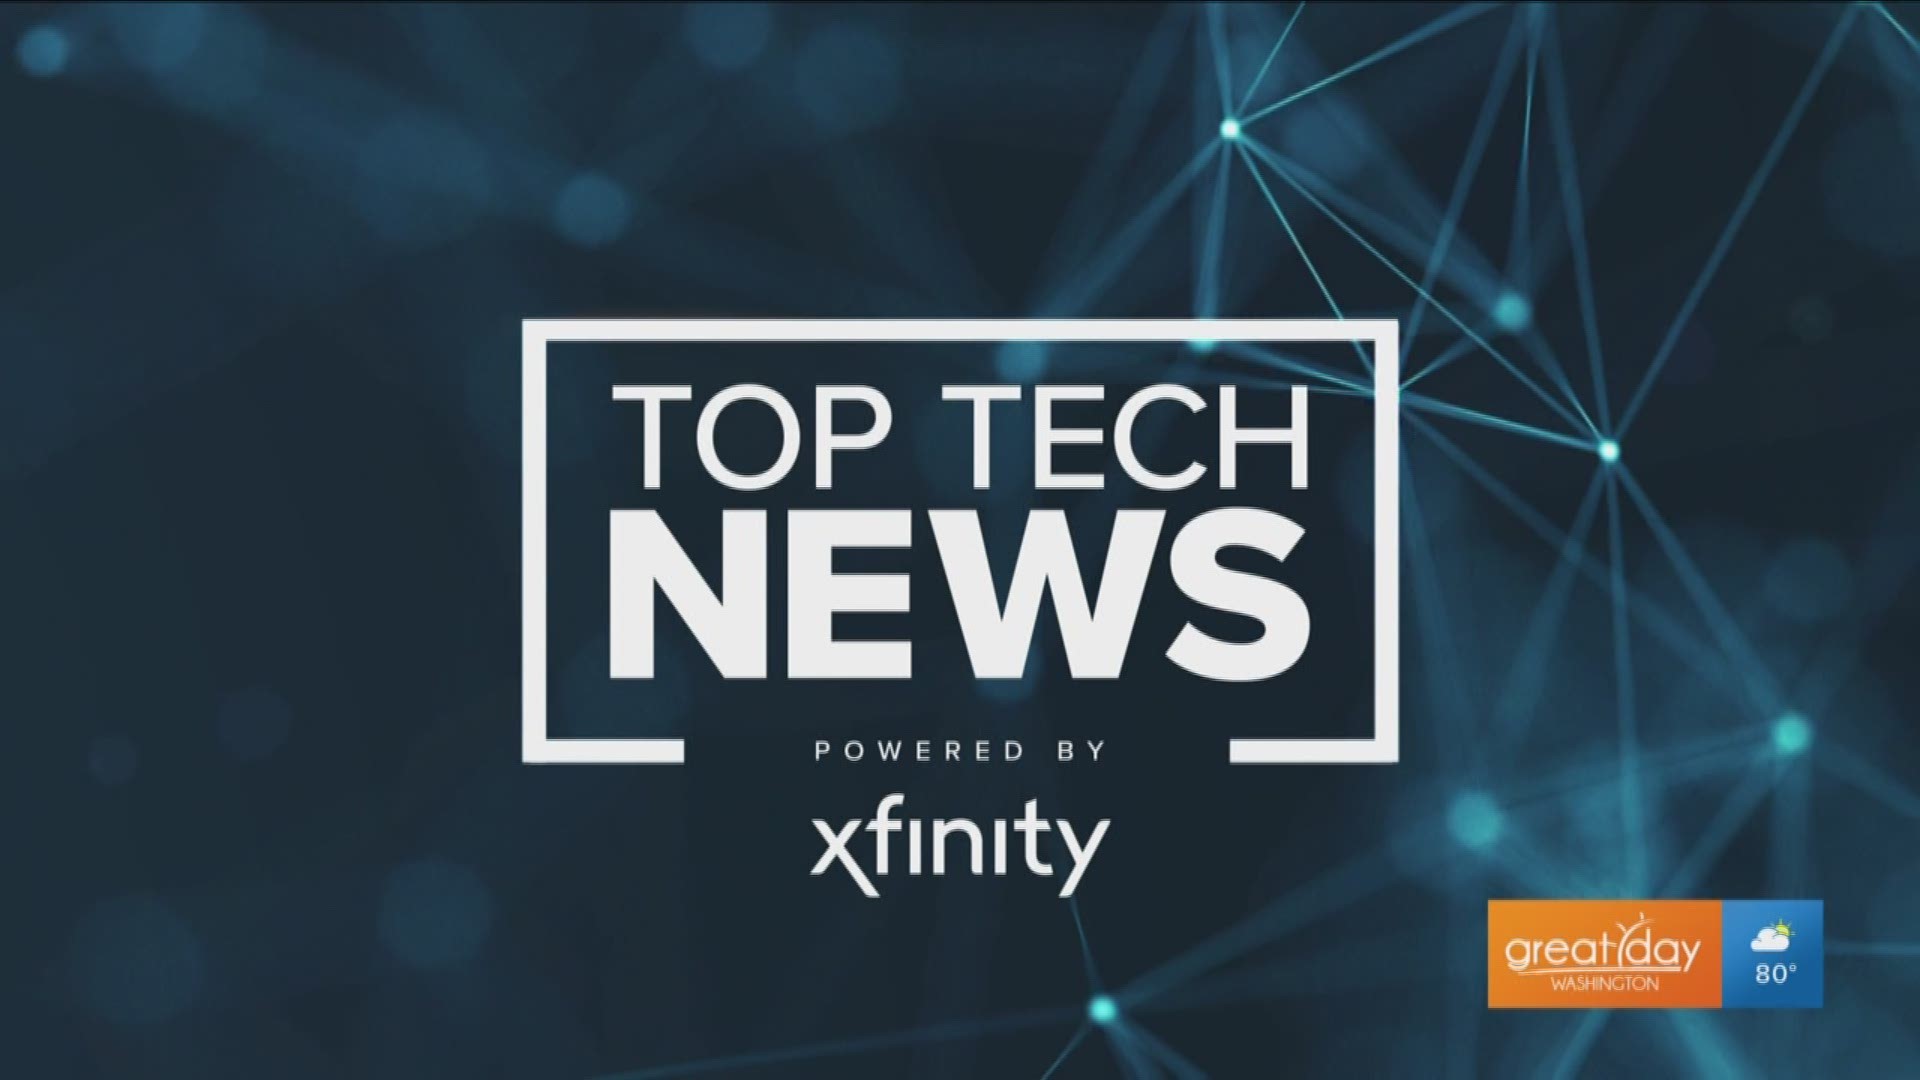 In this week's Top Tech News, Kristen shares tips to prevent falling victim to a scam while shopping online.  Top Tech News is sponsored by Xfinity where they make your life "Simple. Easy. Awesome."  For more information go to Xfinity.com, you can also call 1-800-XFINITY or visit a store today.